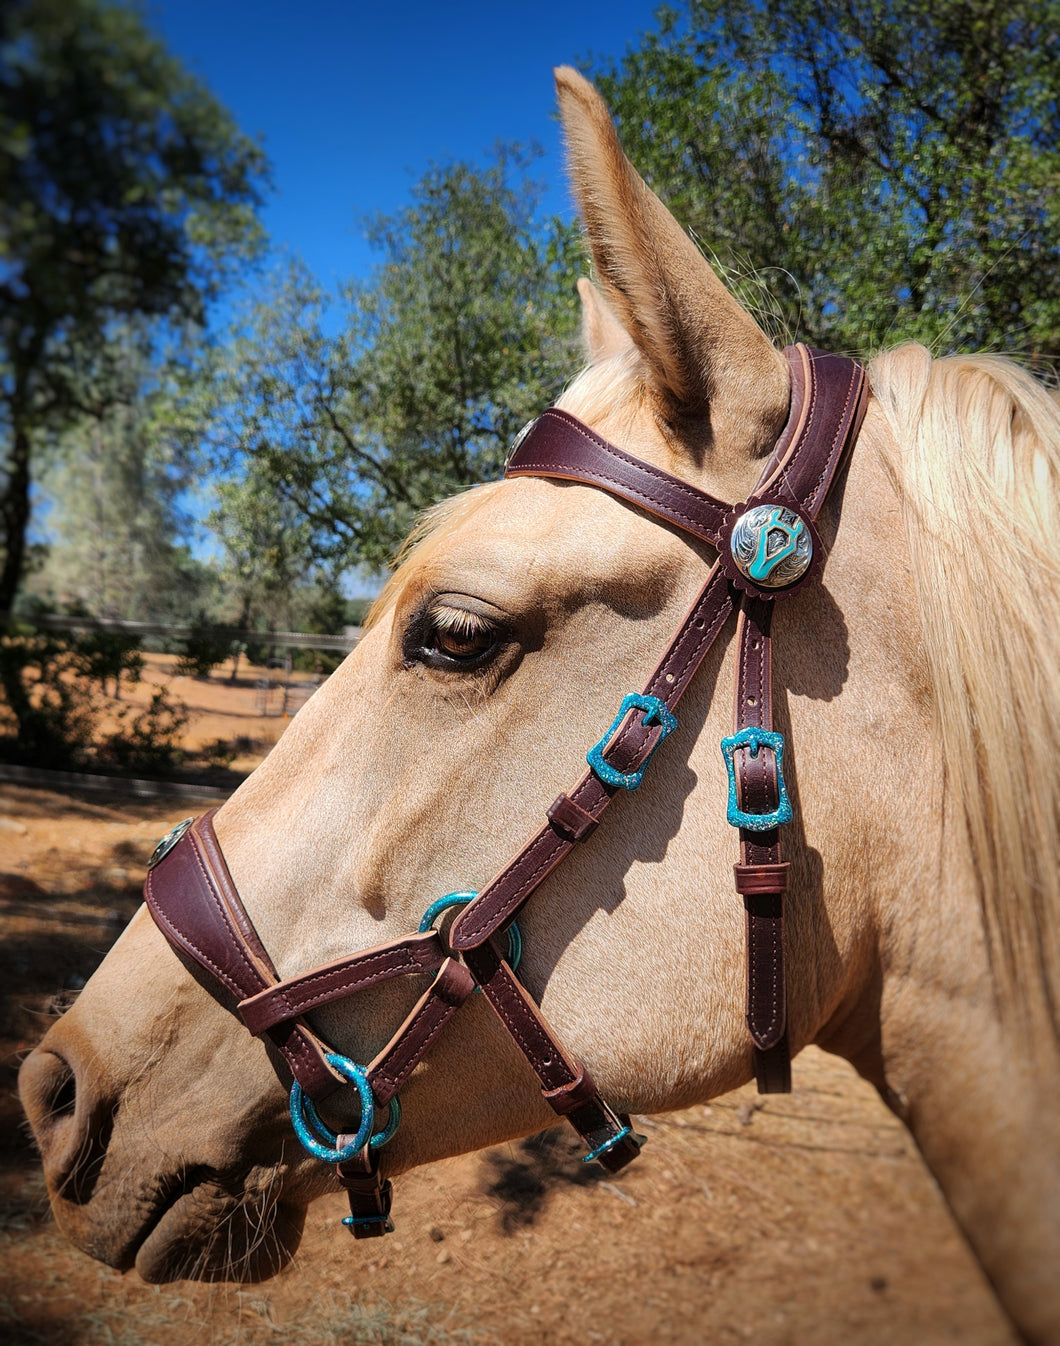 Turquoise sparkle padded bitless sidepull bridle and rein set